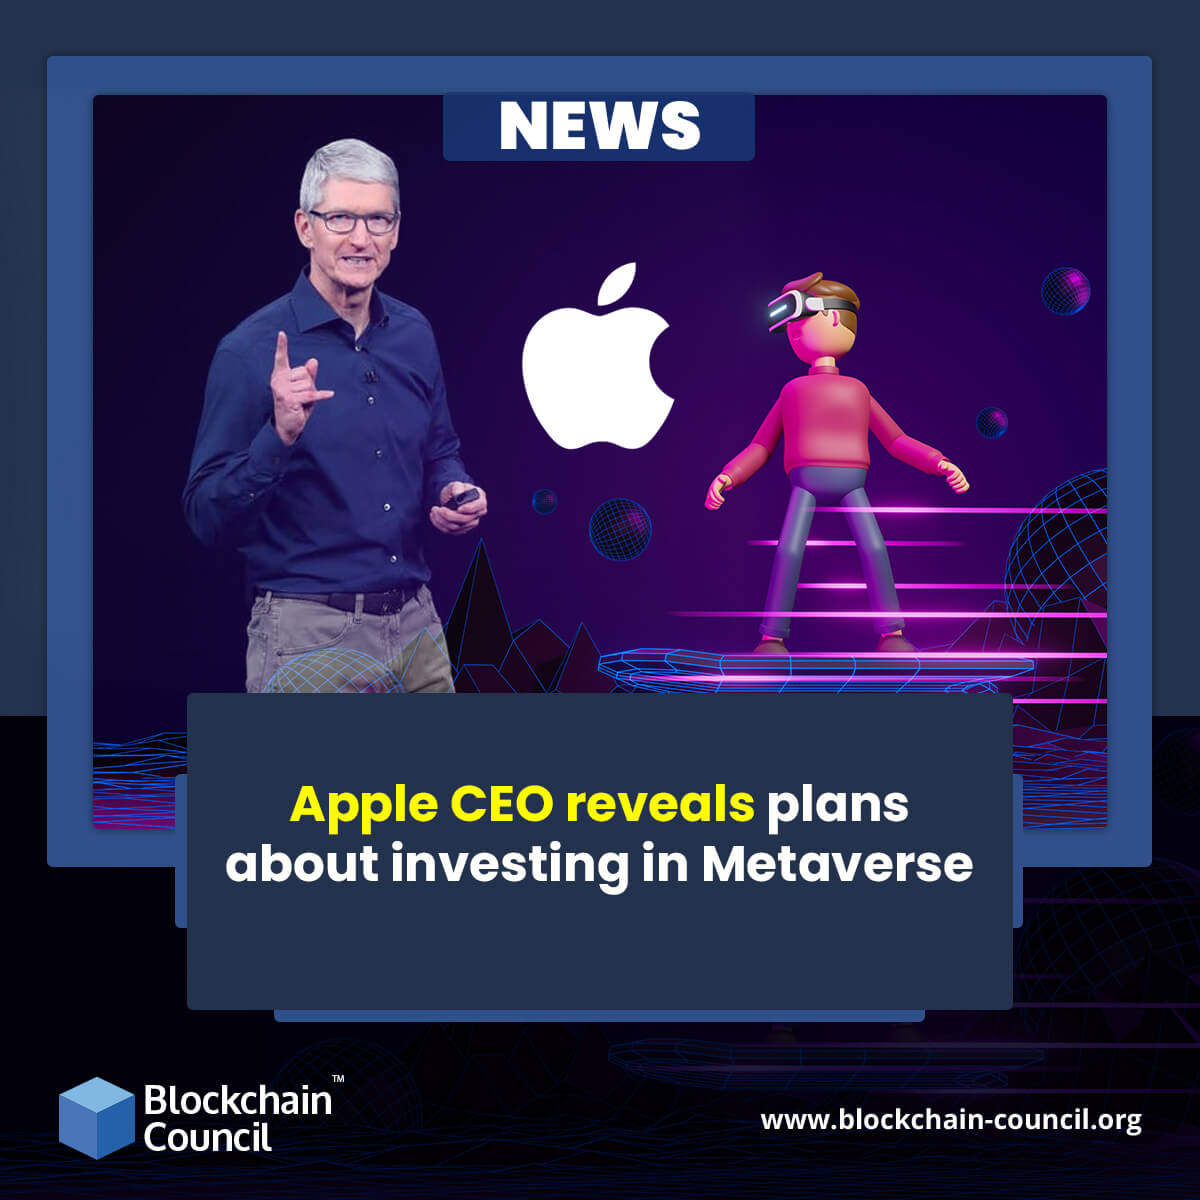 Apple CEO reveals plans about investing in Metaverse